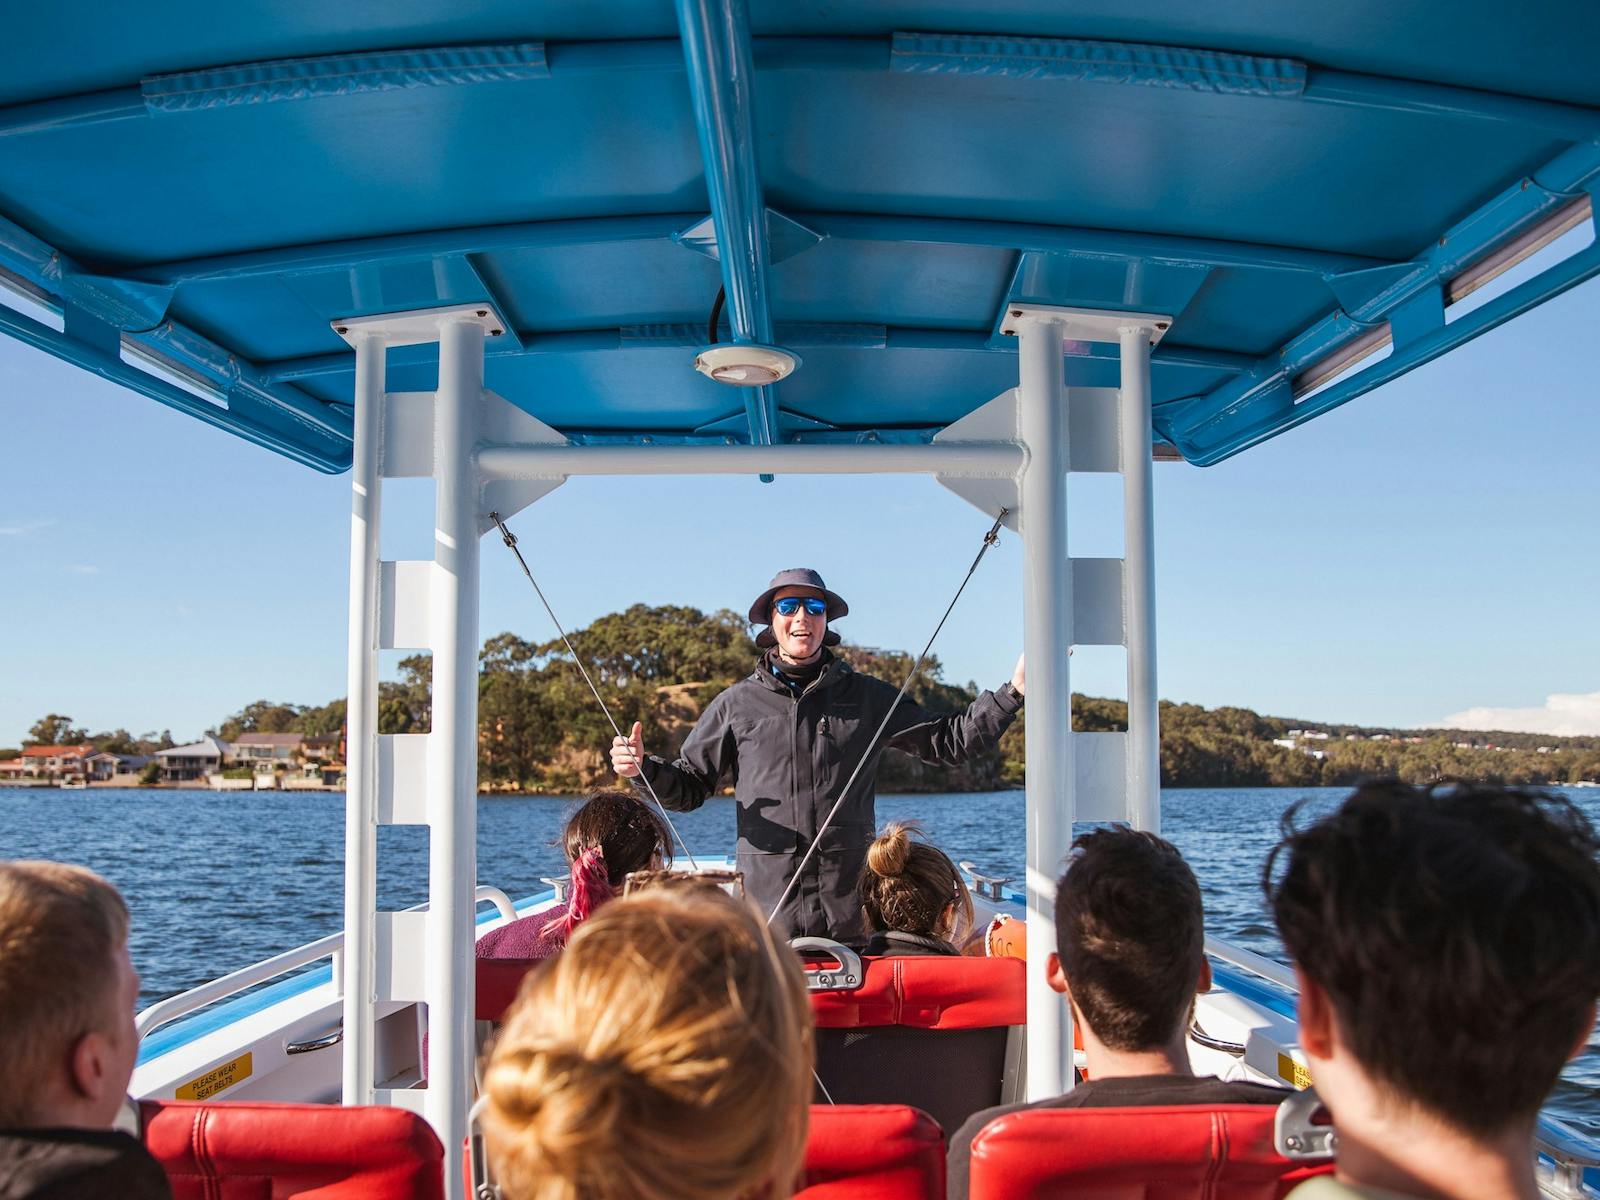 Tour by boat in Lake Macquarie